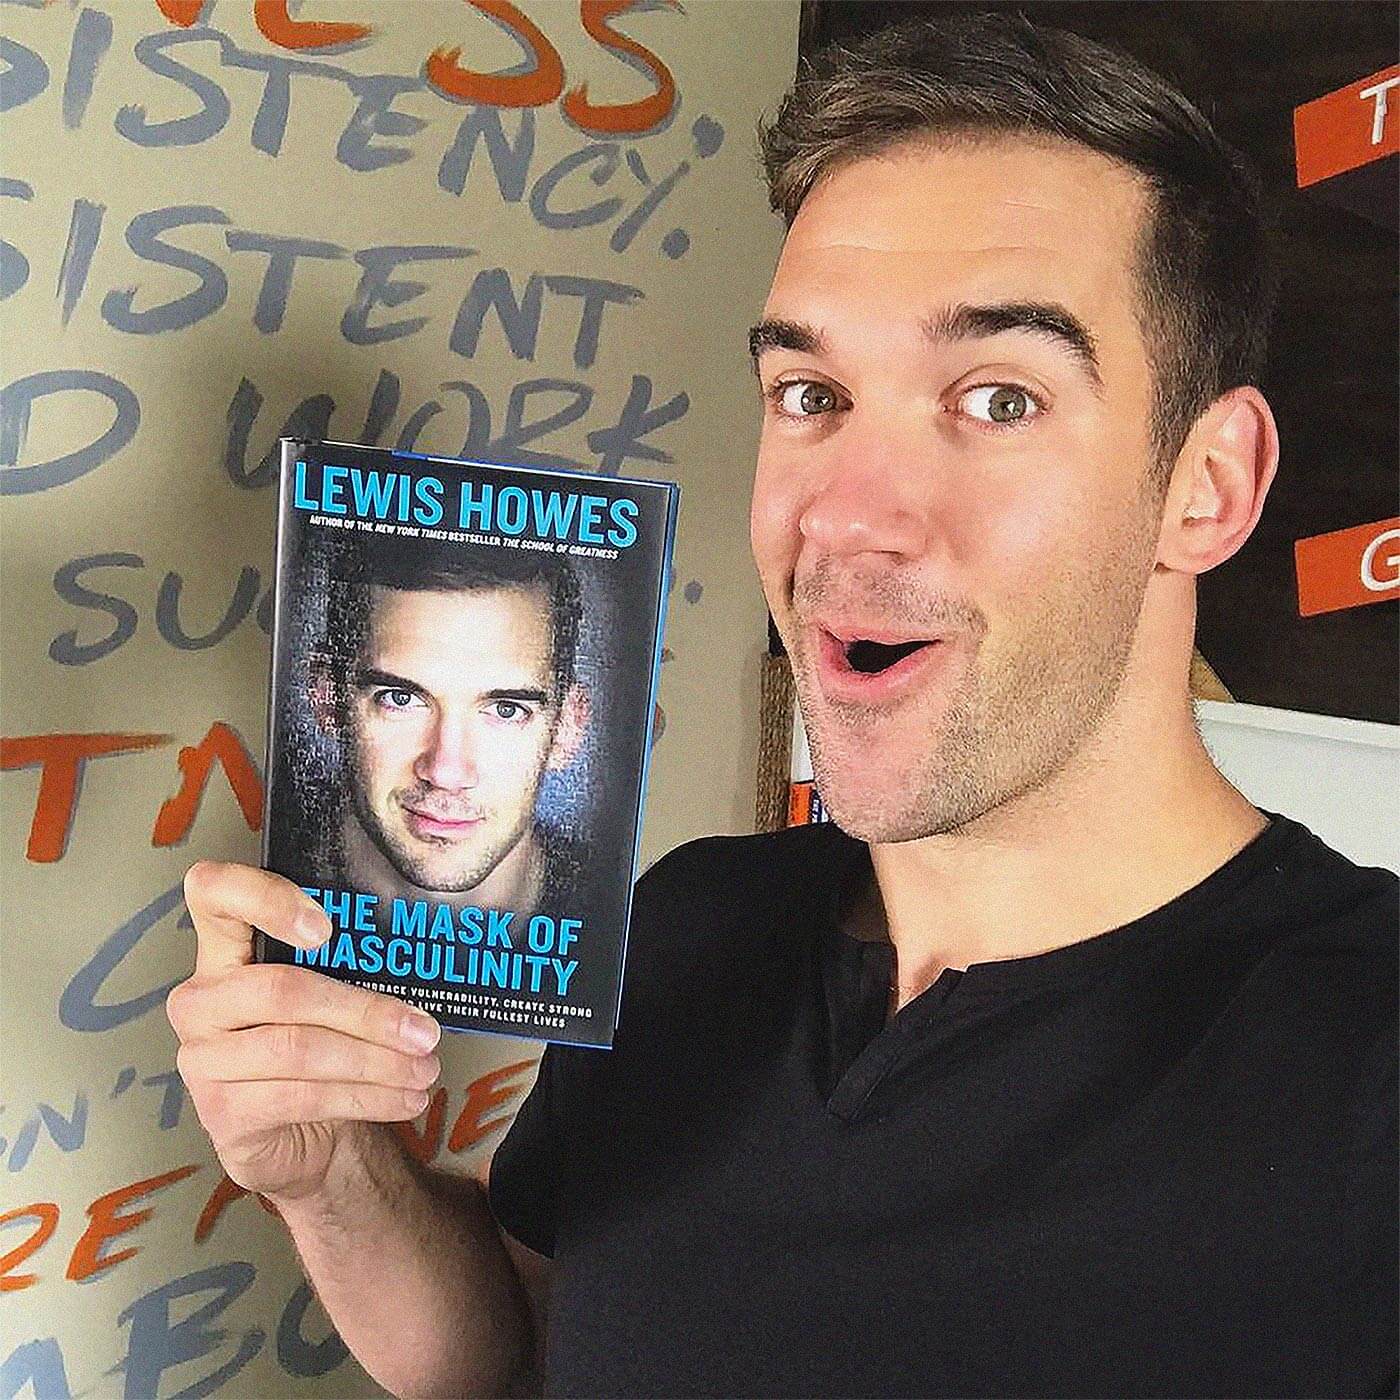 Lewis Howes | The Mask of Masculinity (Episode 688)